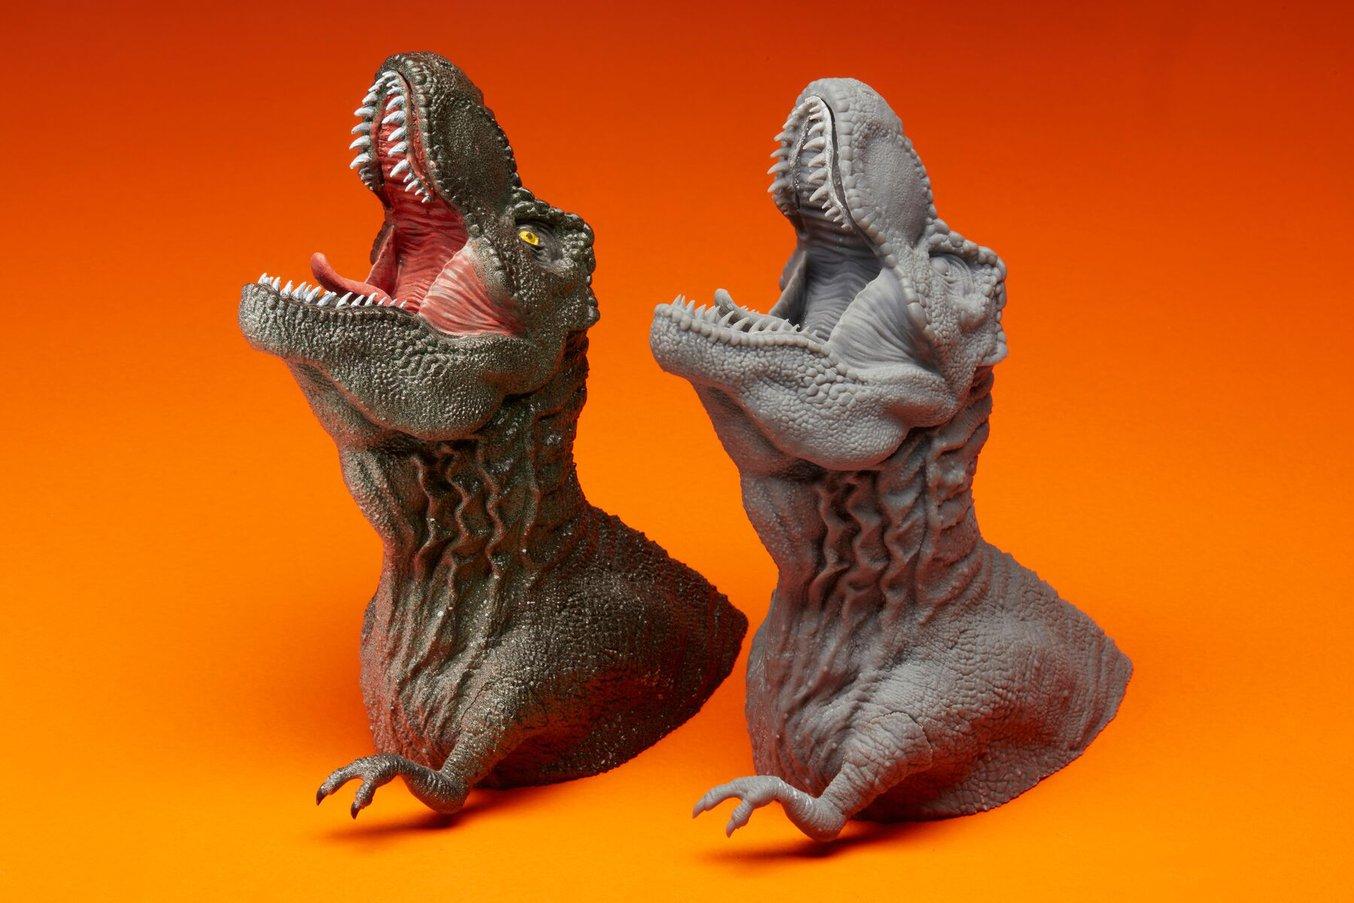 Side by side comparison on the before and after painting a 3D printed dinosaur miniature.